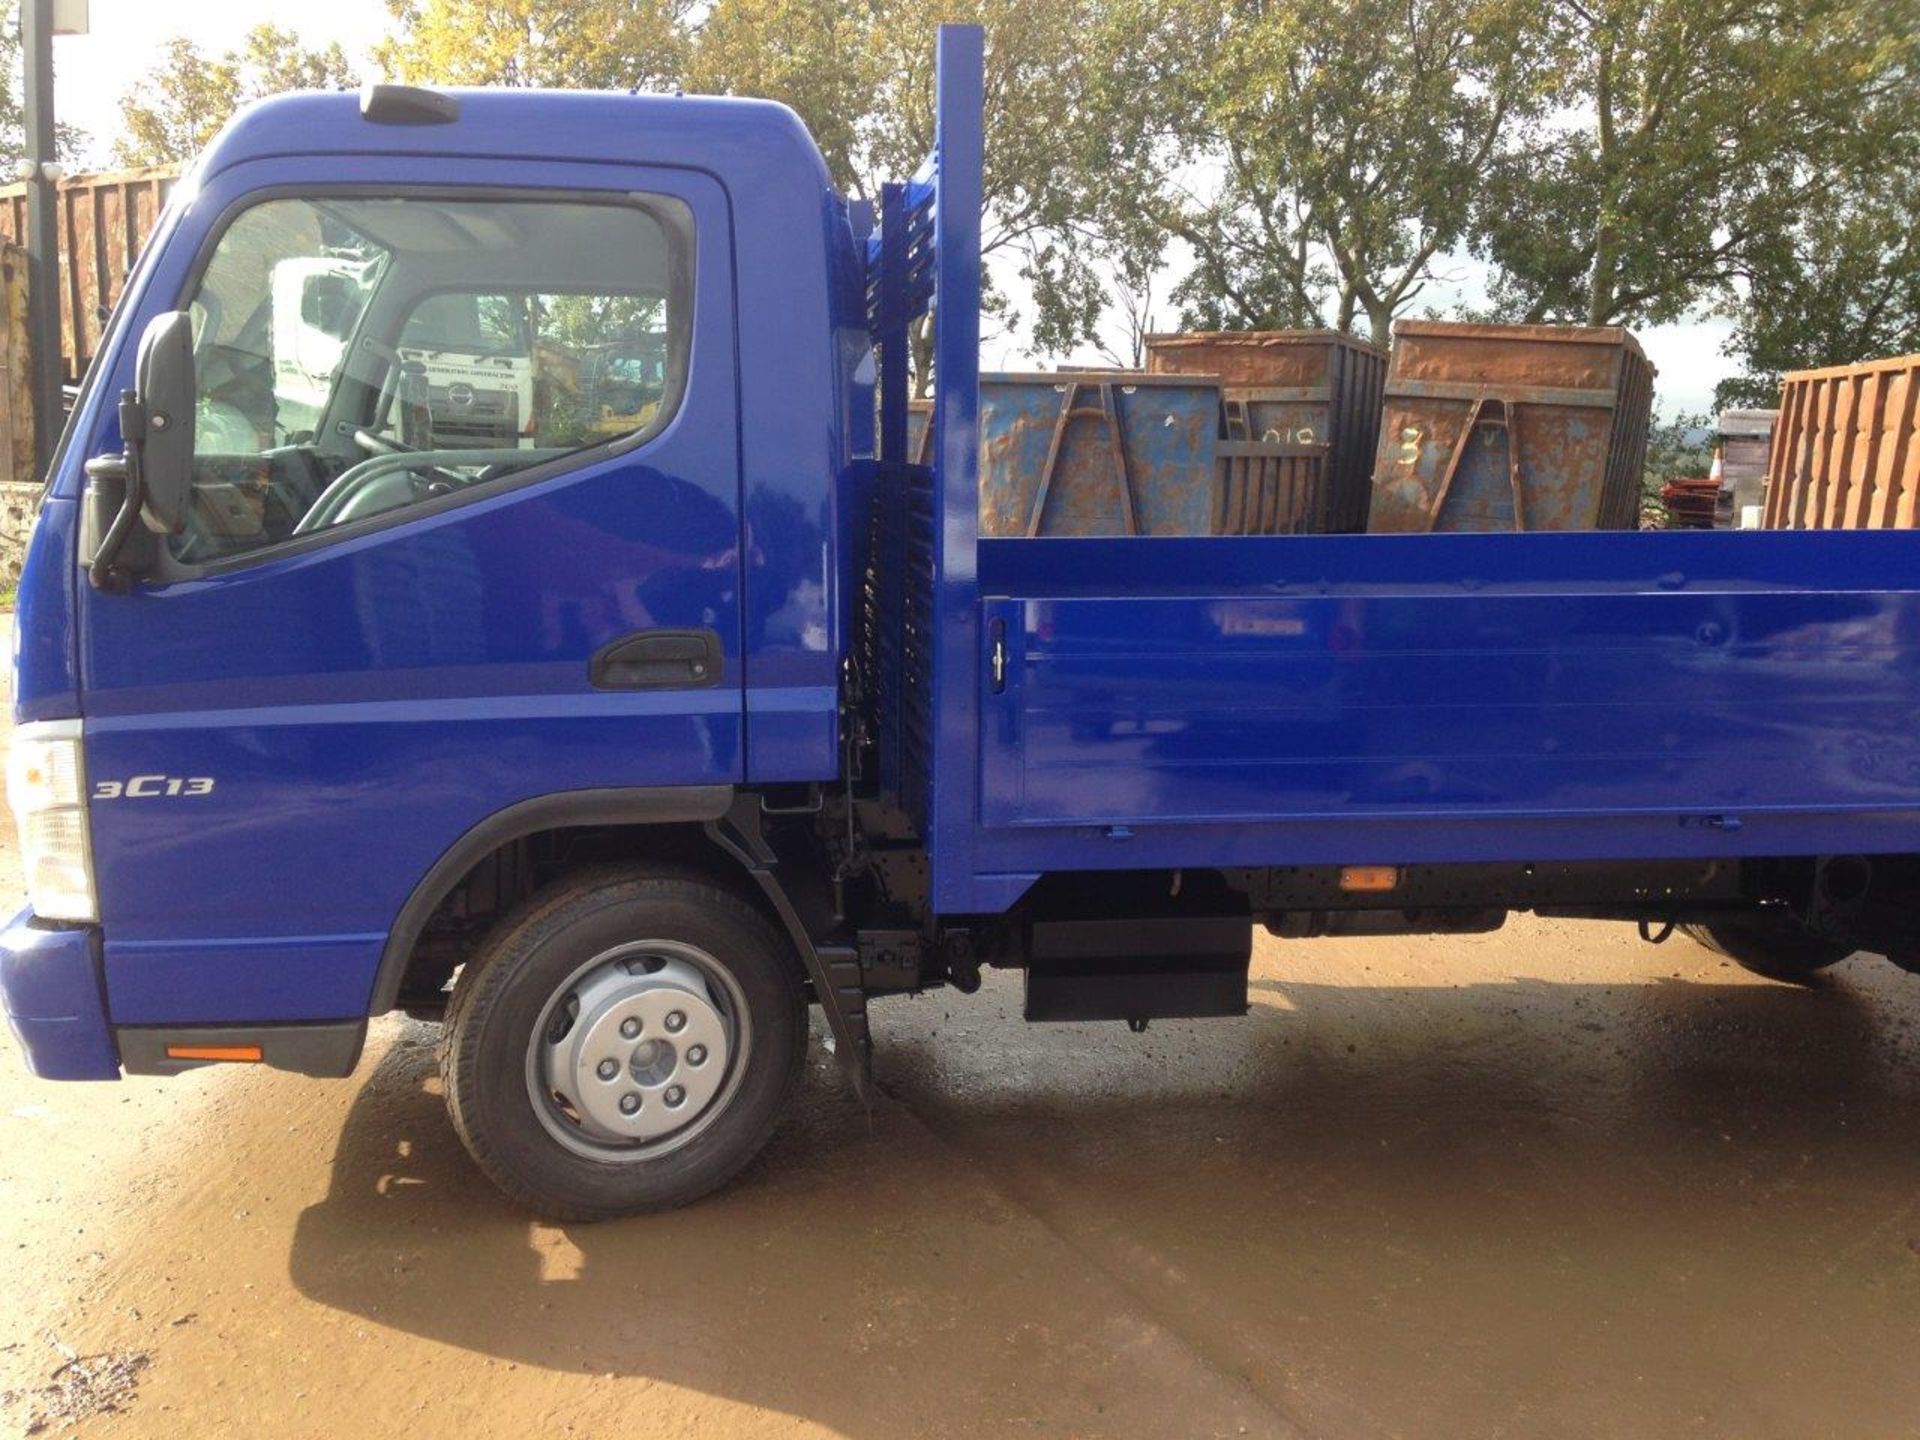 2009/59 REG MITSUBISHI FUSO CANTER 3C13-34 LWB 14 FT DROPSIDE TRUCK ONE OWNER - Image 6 of 10